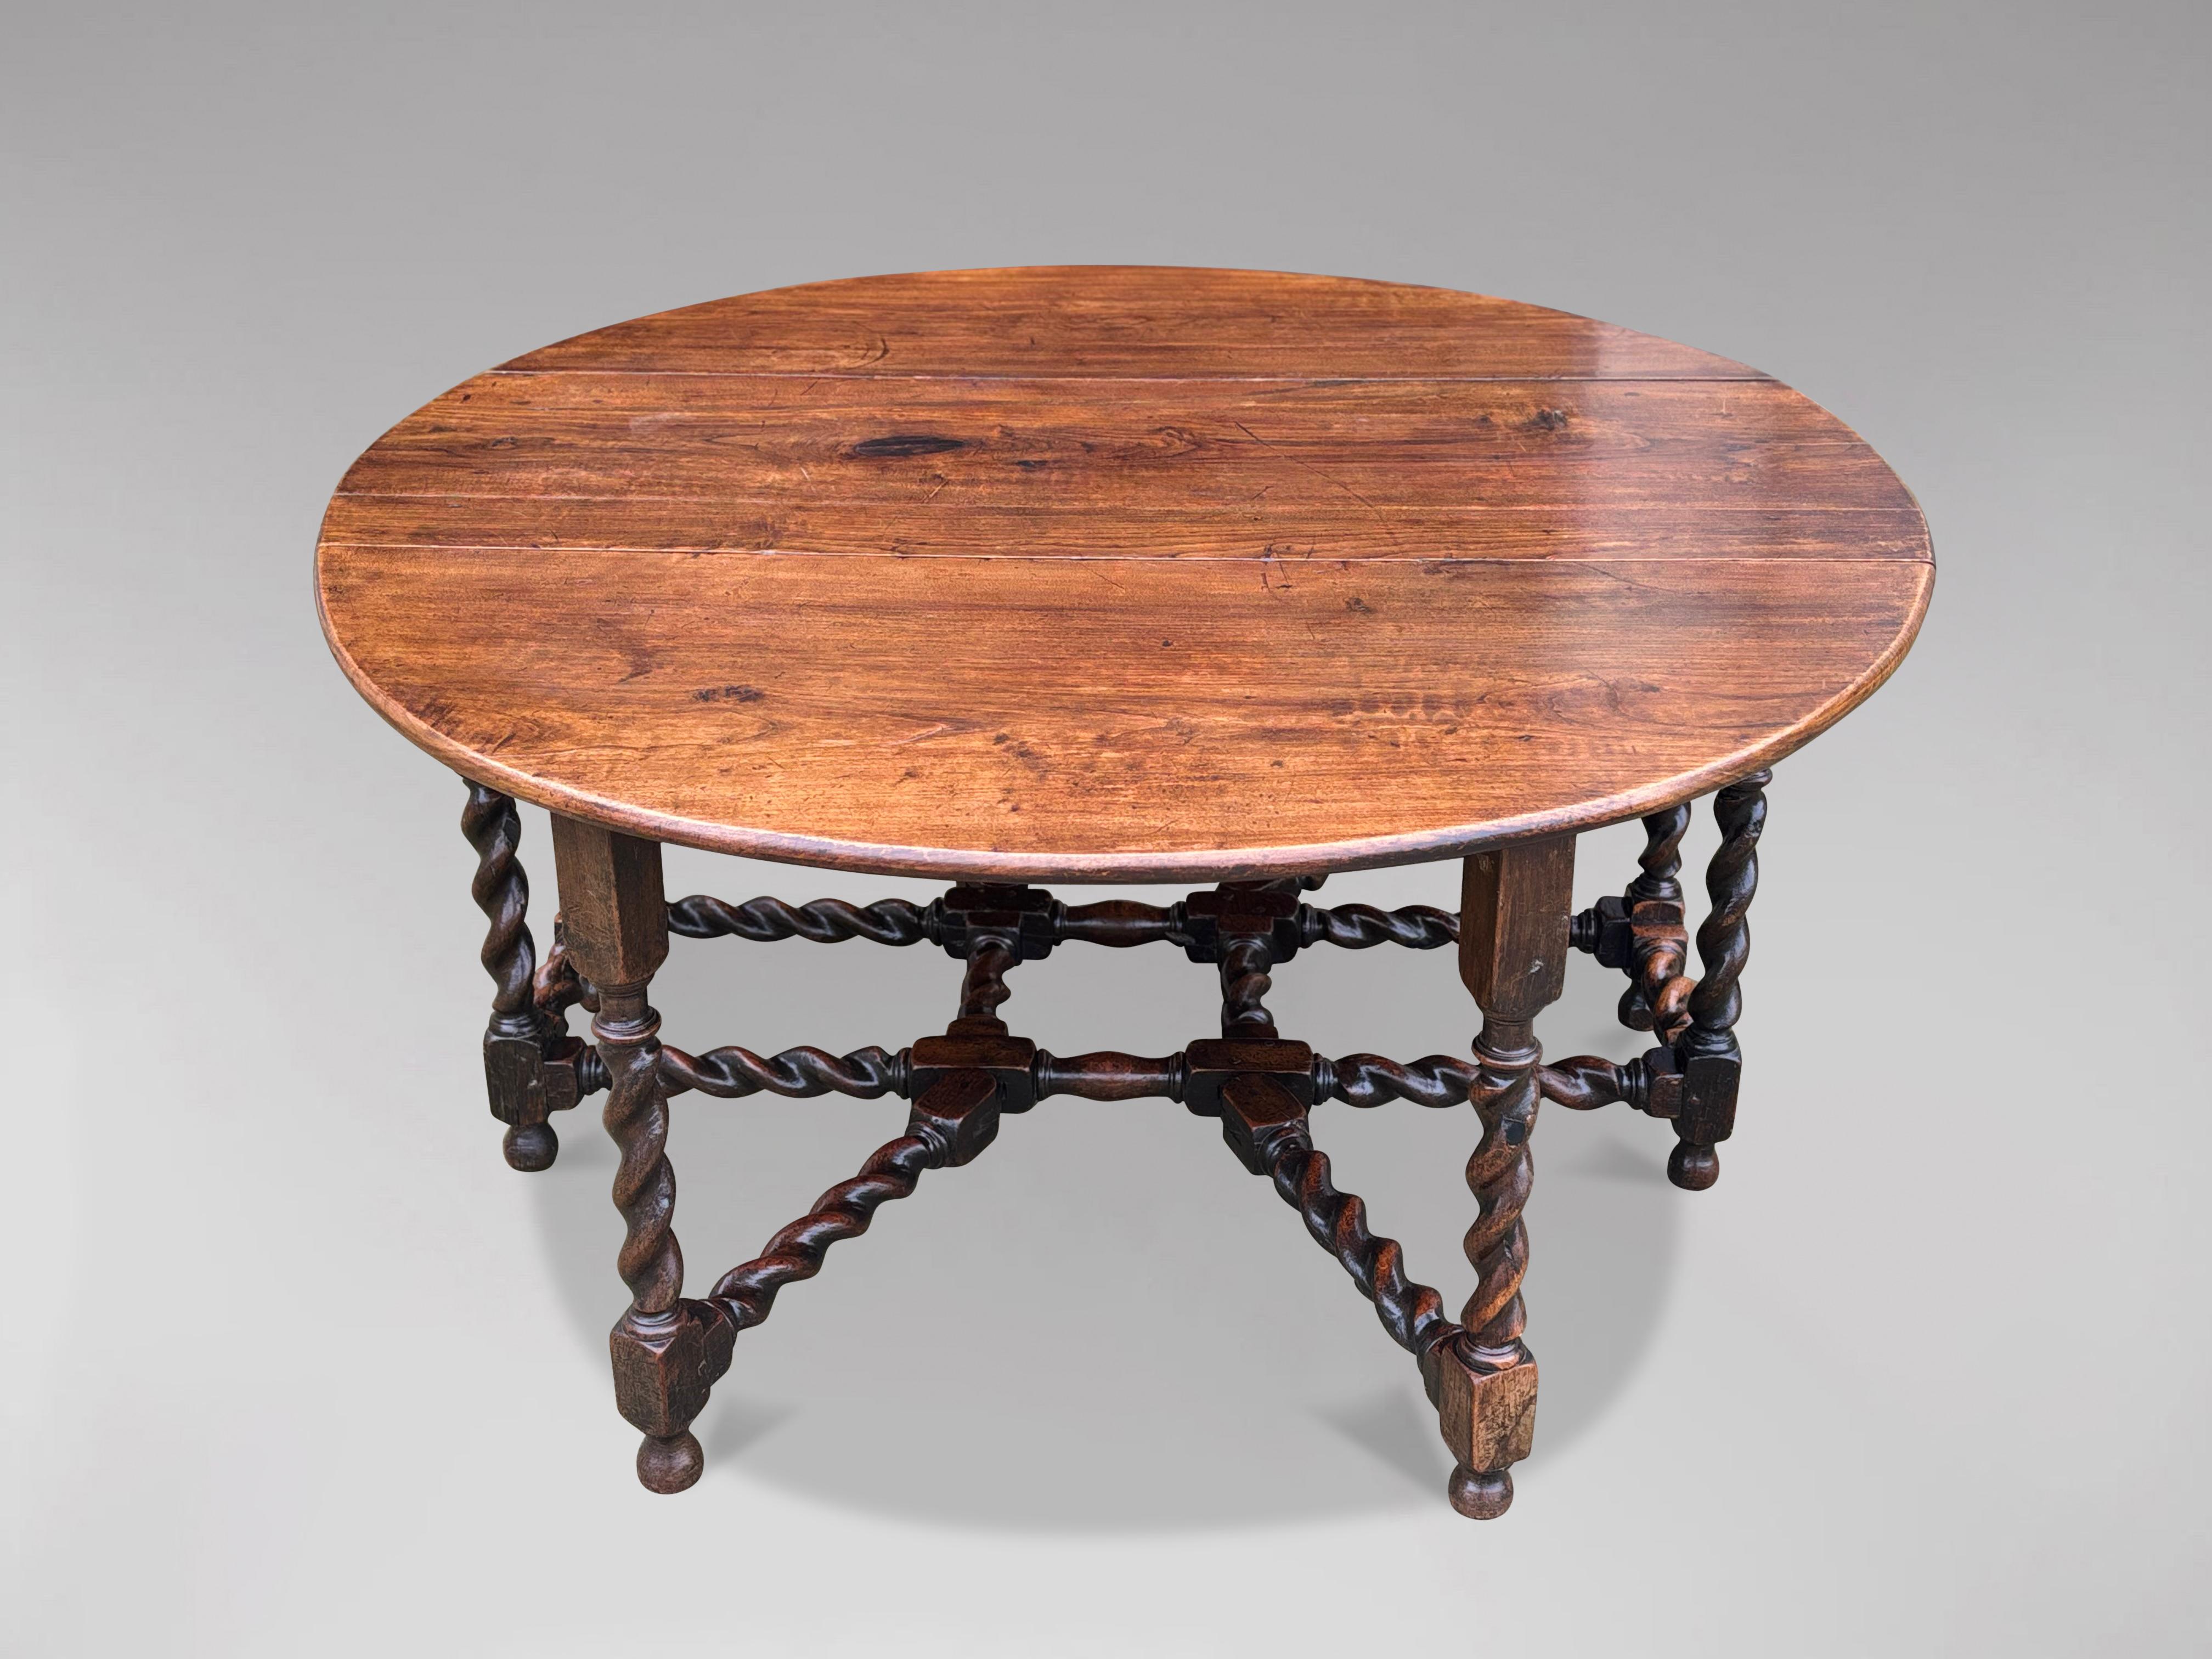 A stunning mid 17th century, Charles II period, large solid oak double gateleg dining table. The oval plank oak top above bold barley twist turned uprights with matching twin knuckle joined gates, joined by further twist turned stretchers and tie